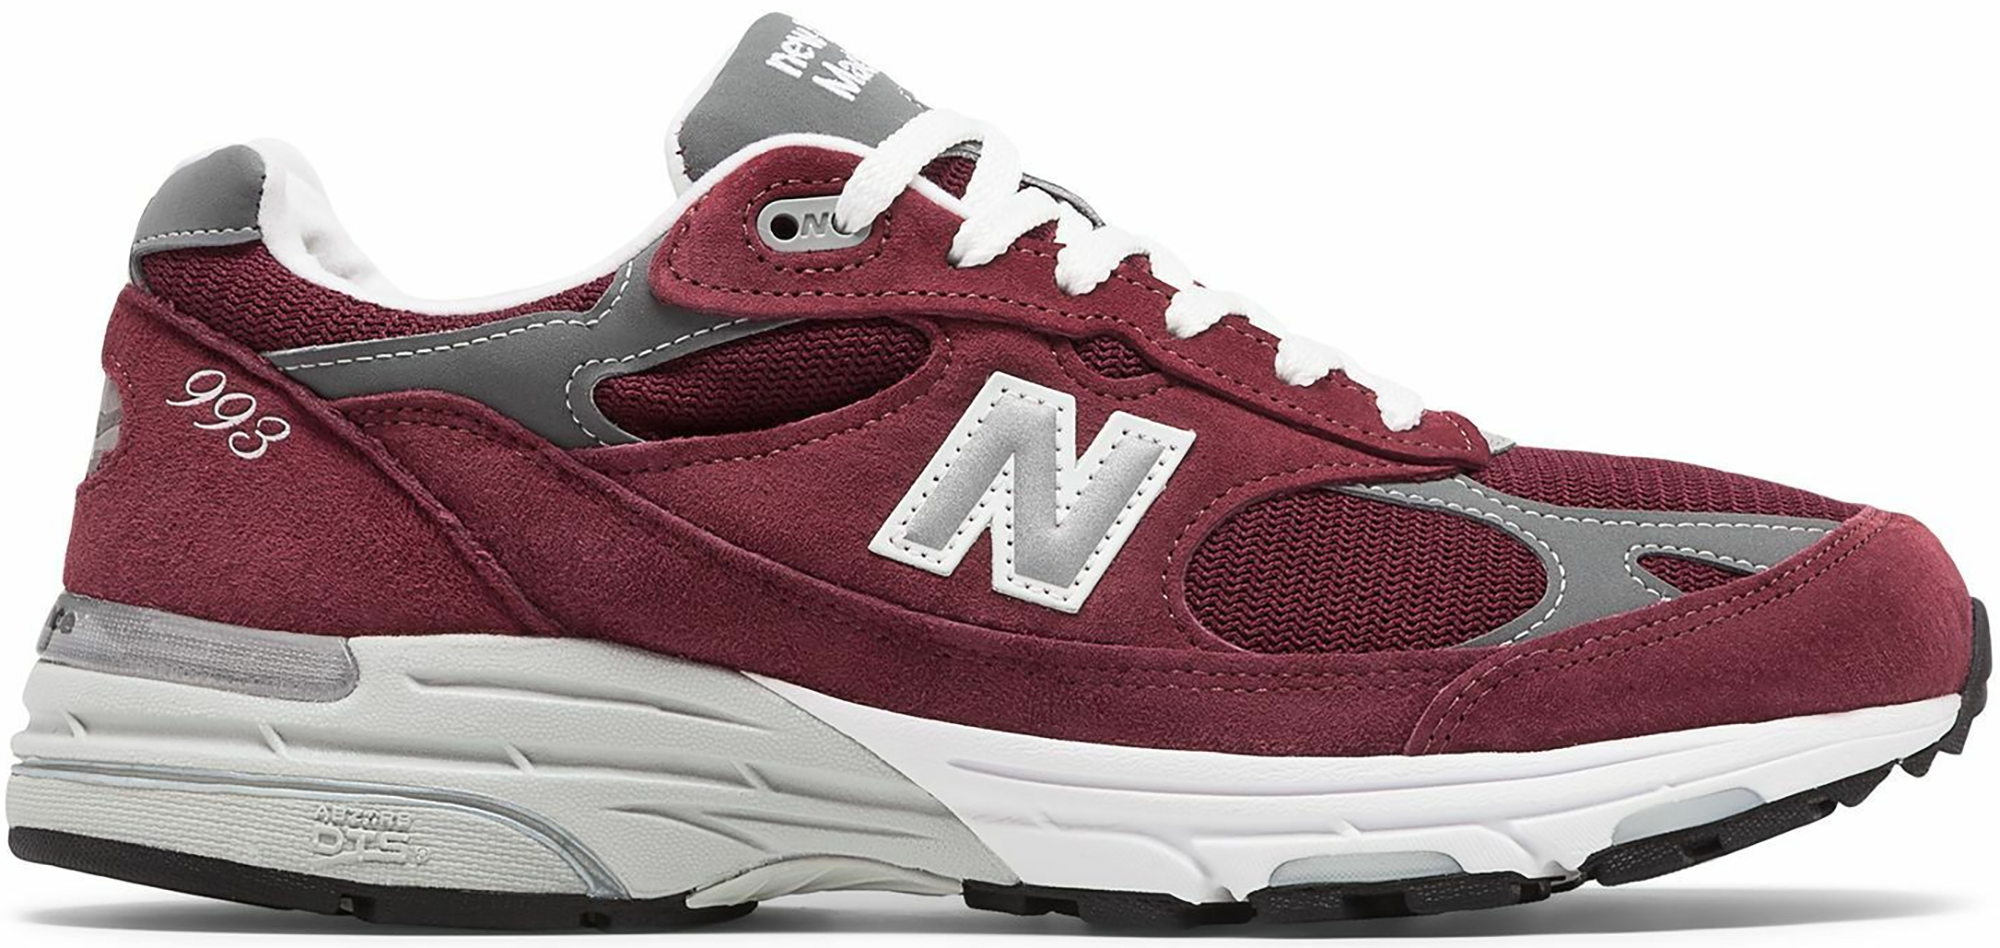 pink 993 new balance shoes